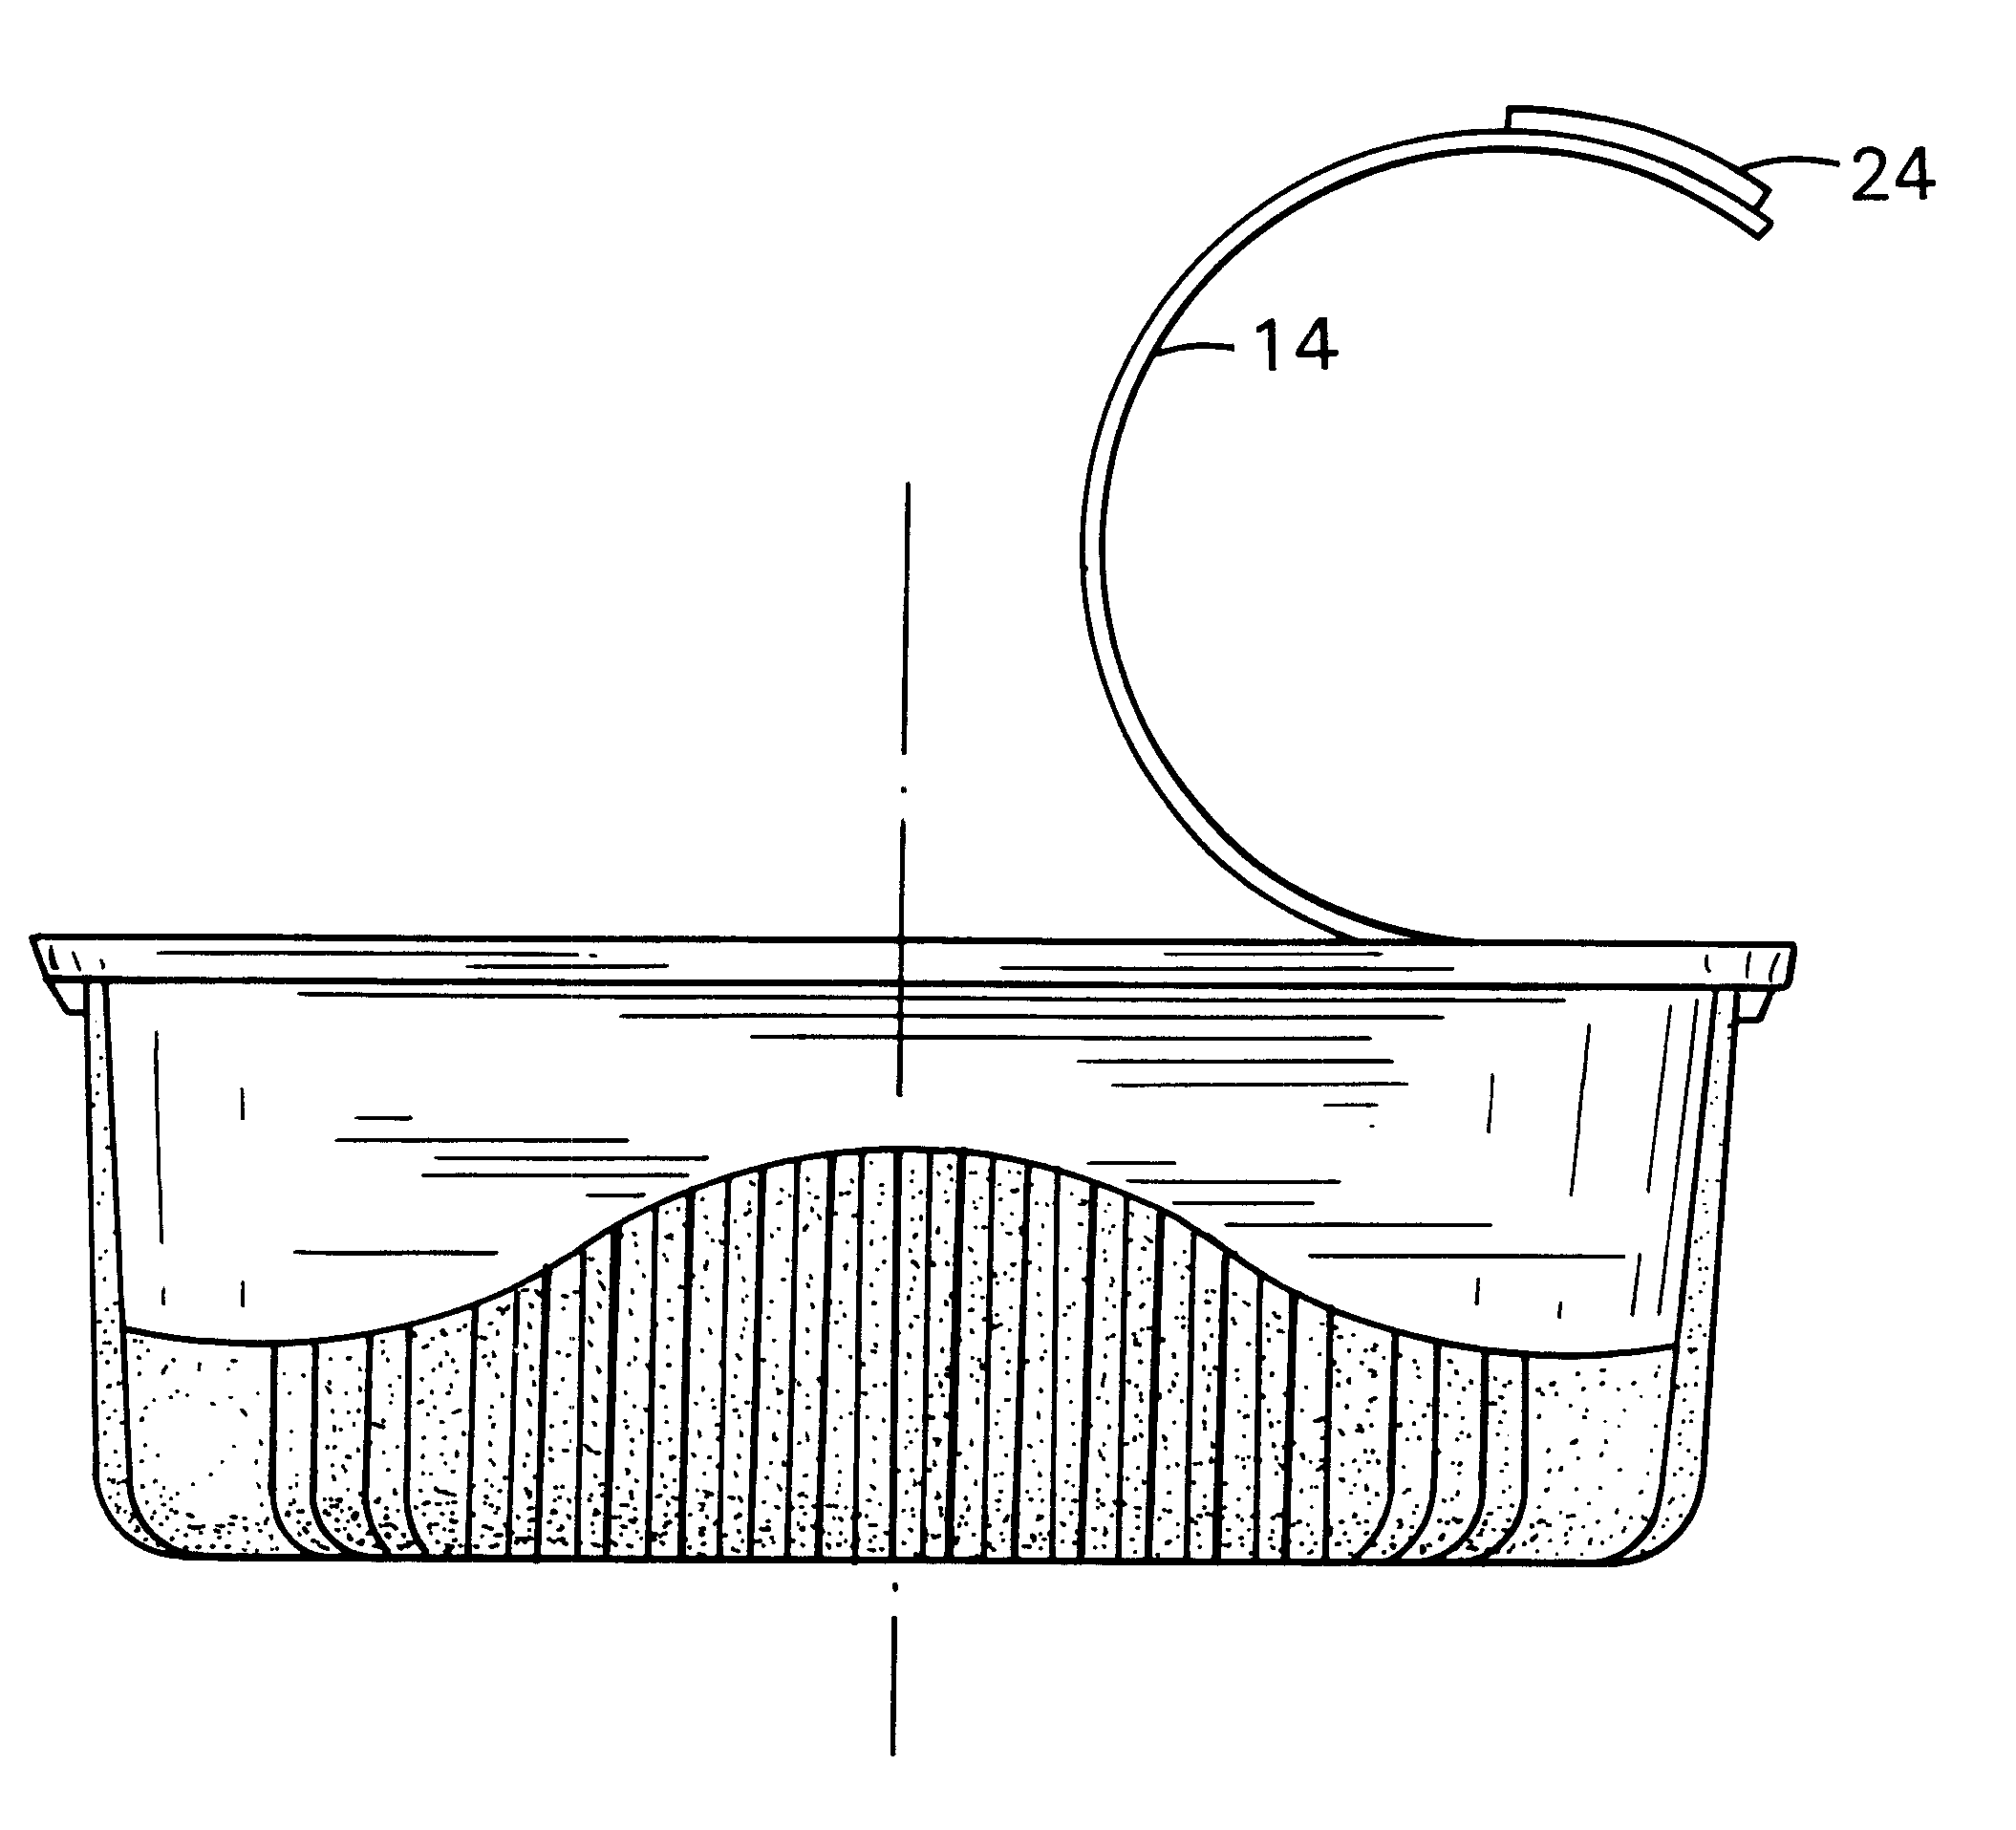 Sealed container for an article of personal use such as a razor cartridge